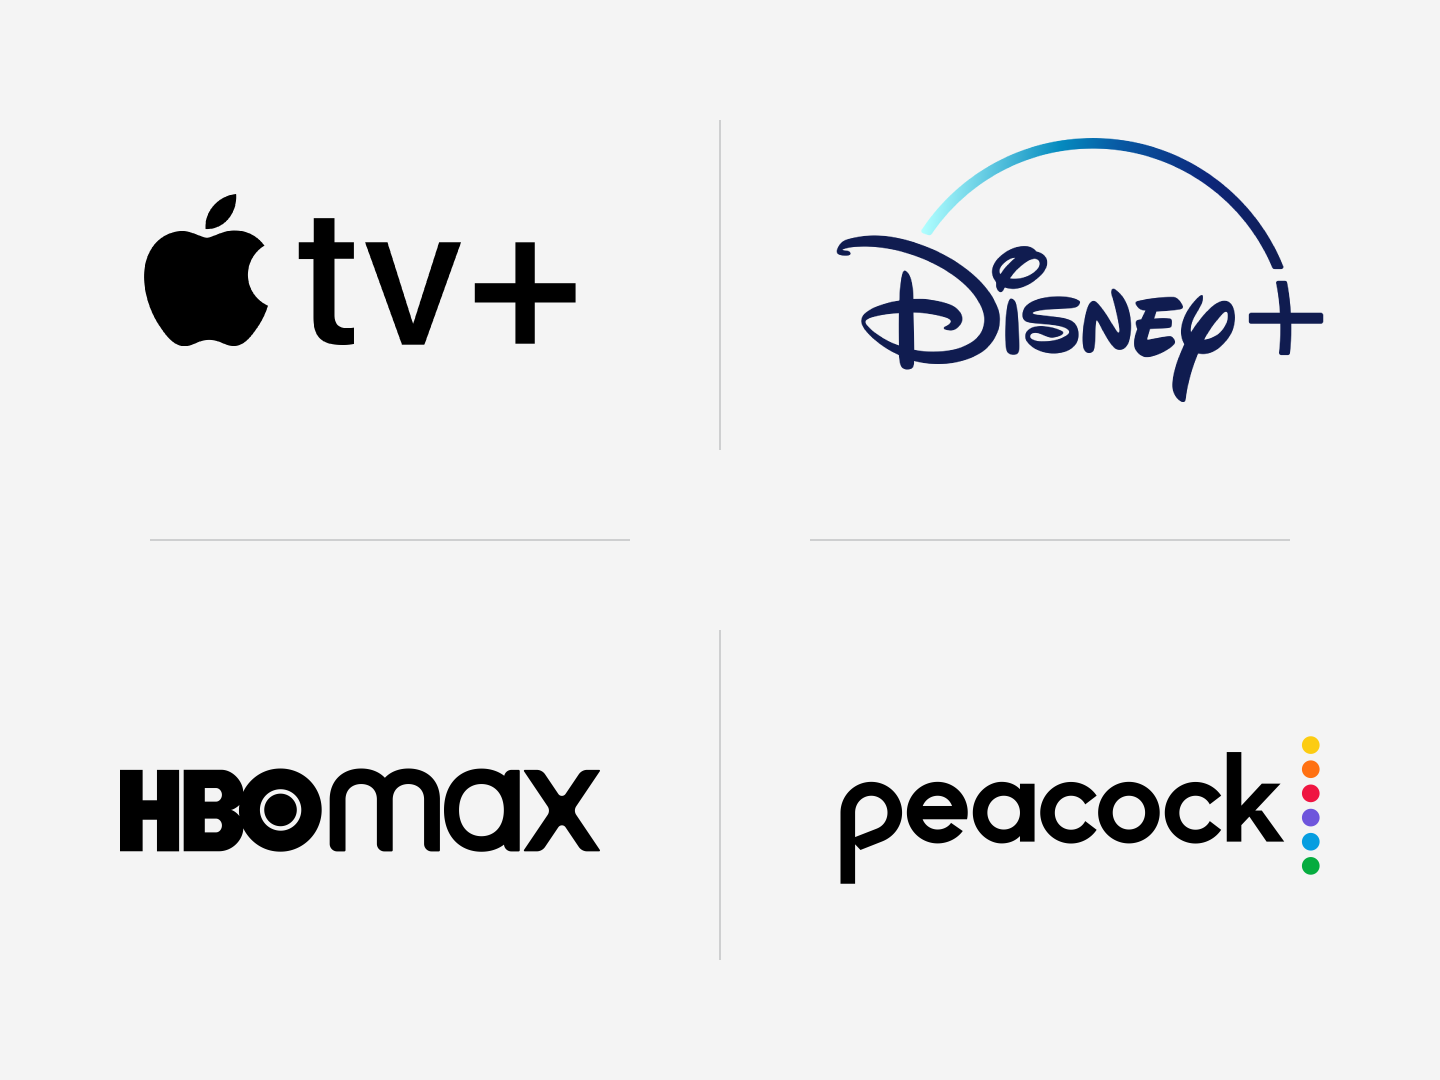 Apple TV+ just launched, Disney+ is launching on November 12, HBO Max is coming in May 2020, and Peacock from NBC Universal will arrive in April of next year.